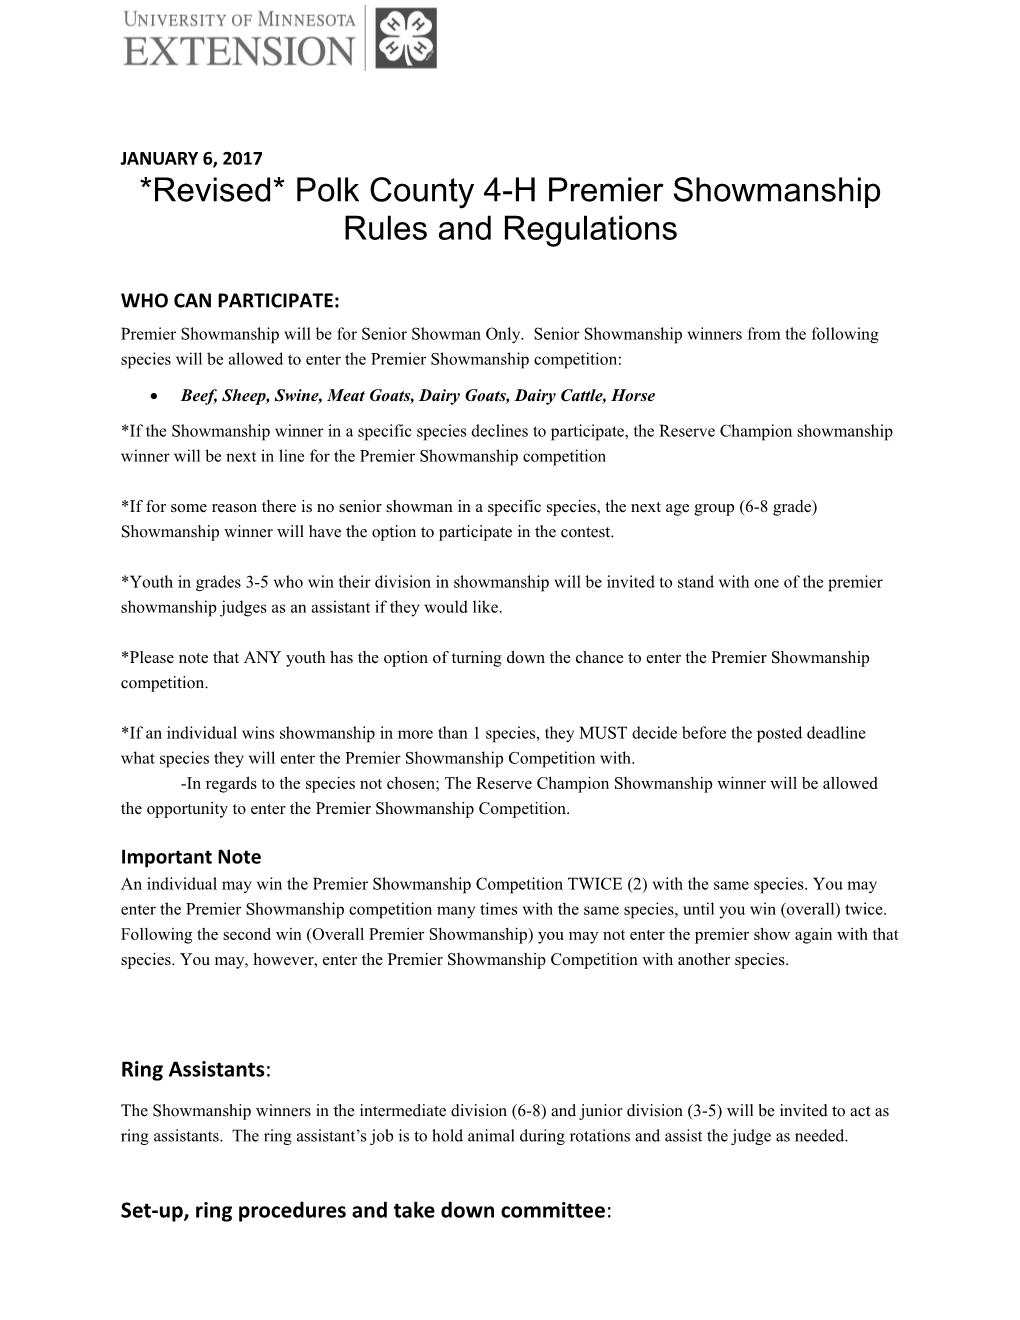 *Revised* Polk County 4-H Premier Showmanship Rules and Regulations